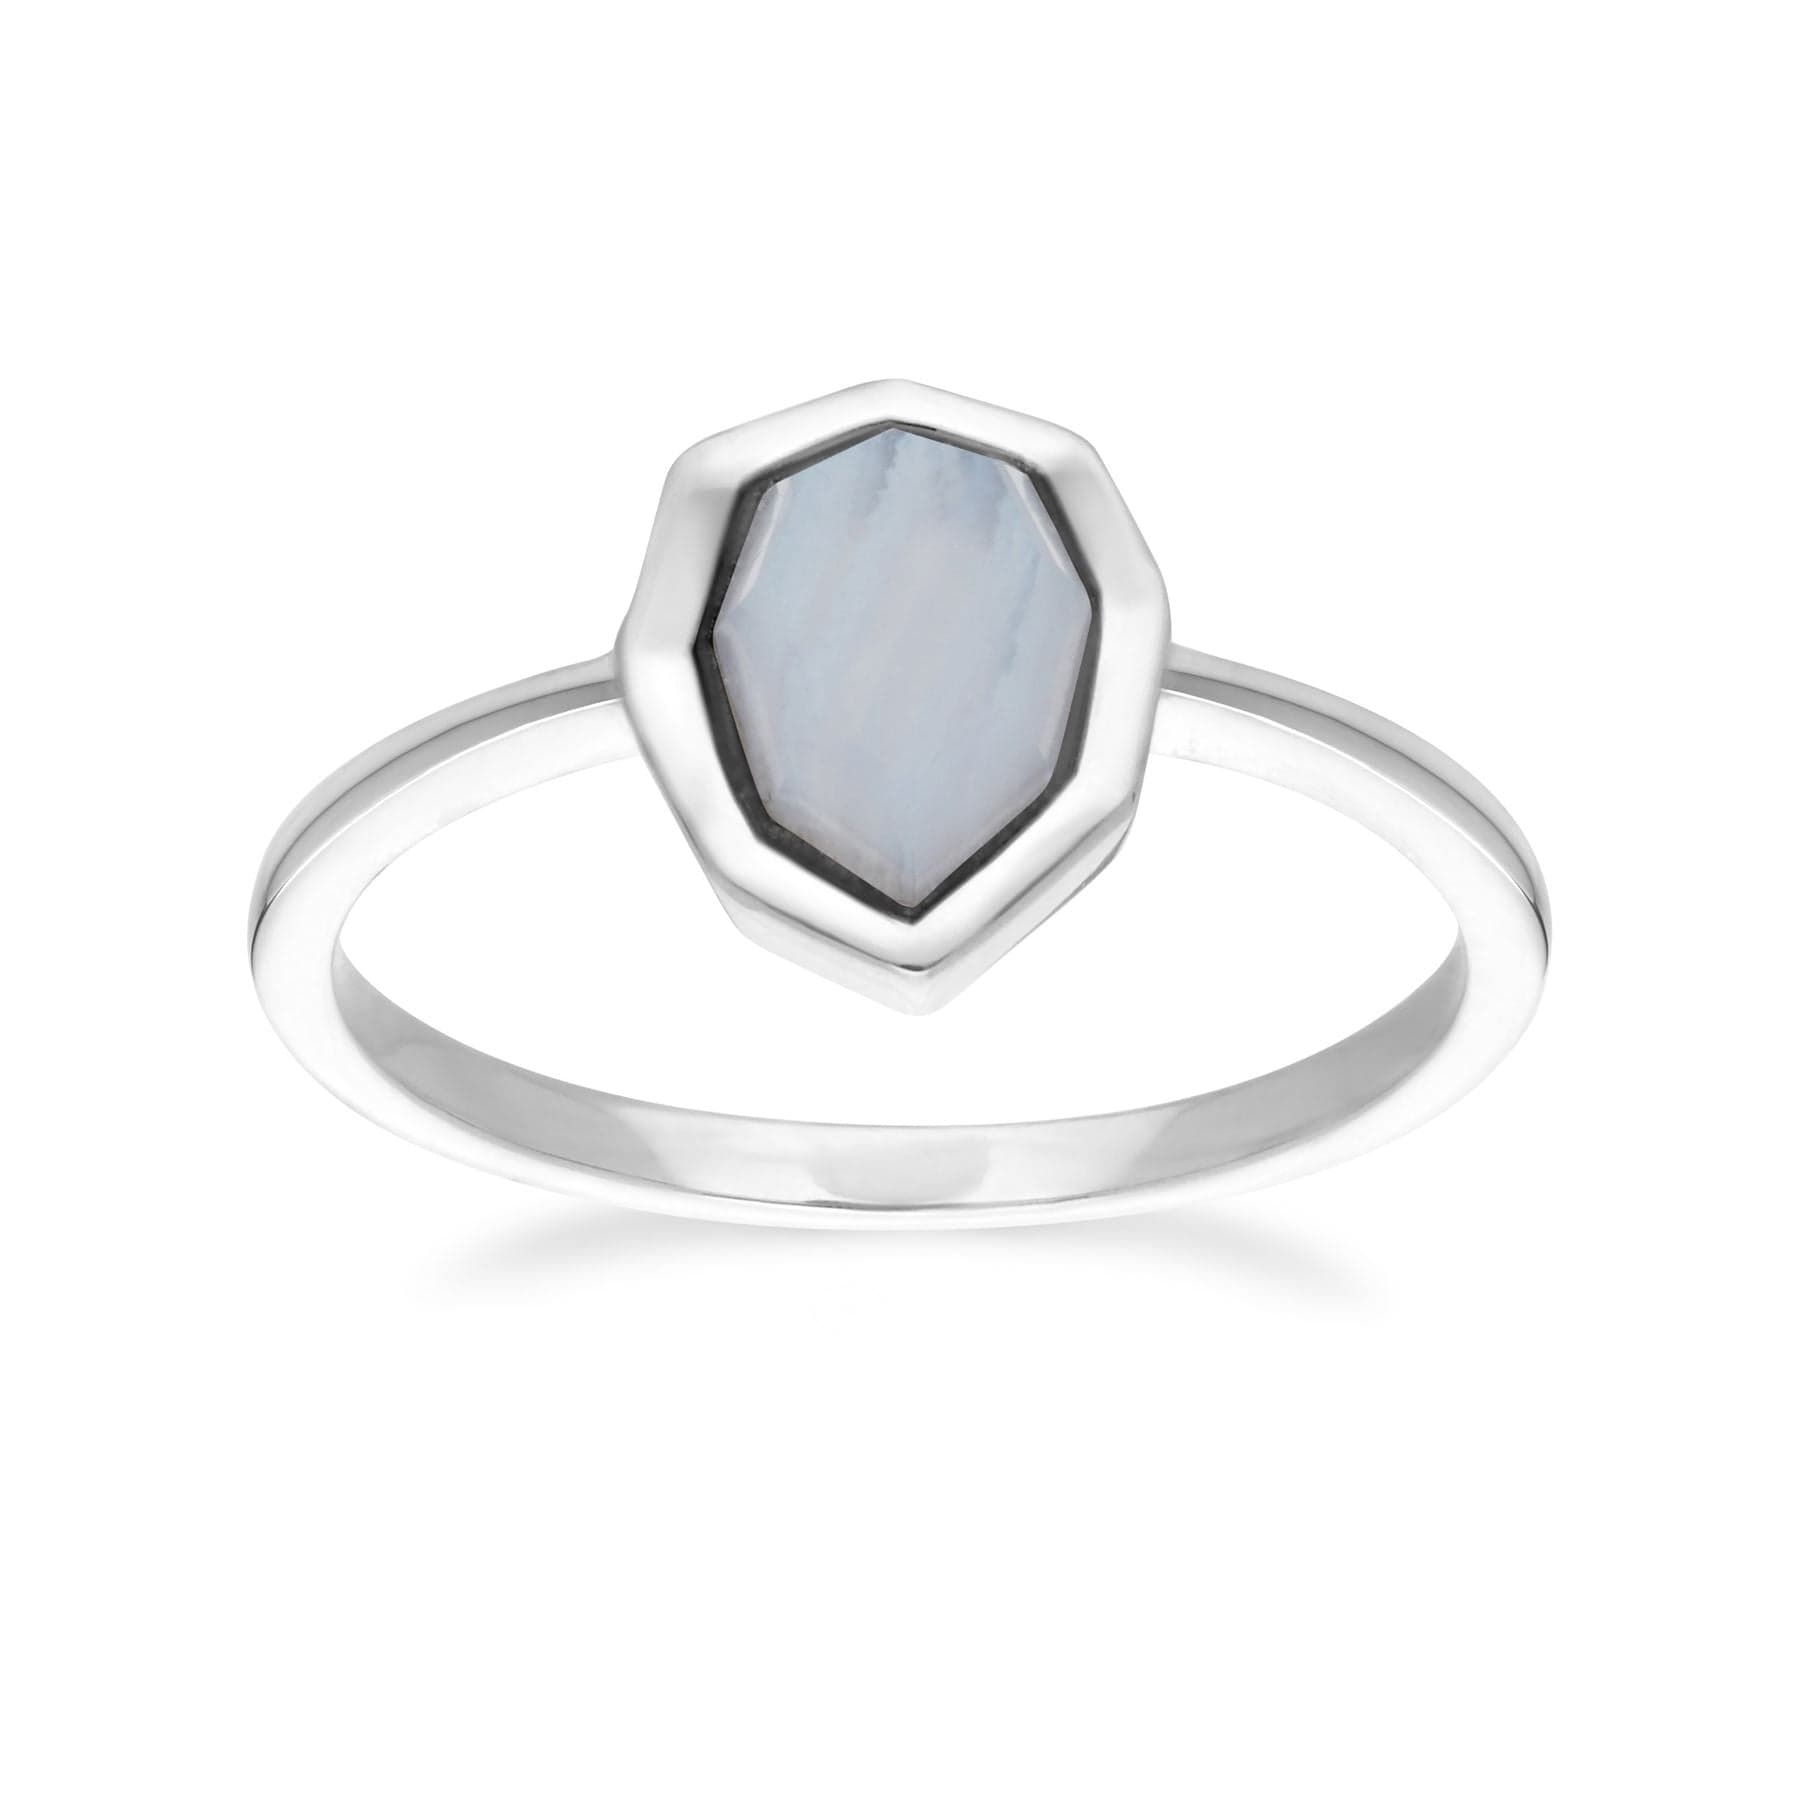 271R025601925 Irregular B Gem Blue Lace Agate Ring in Sterling Silver 2